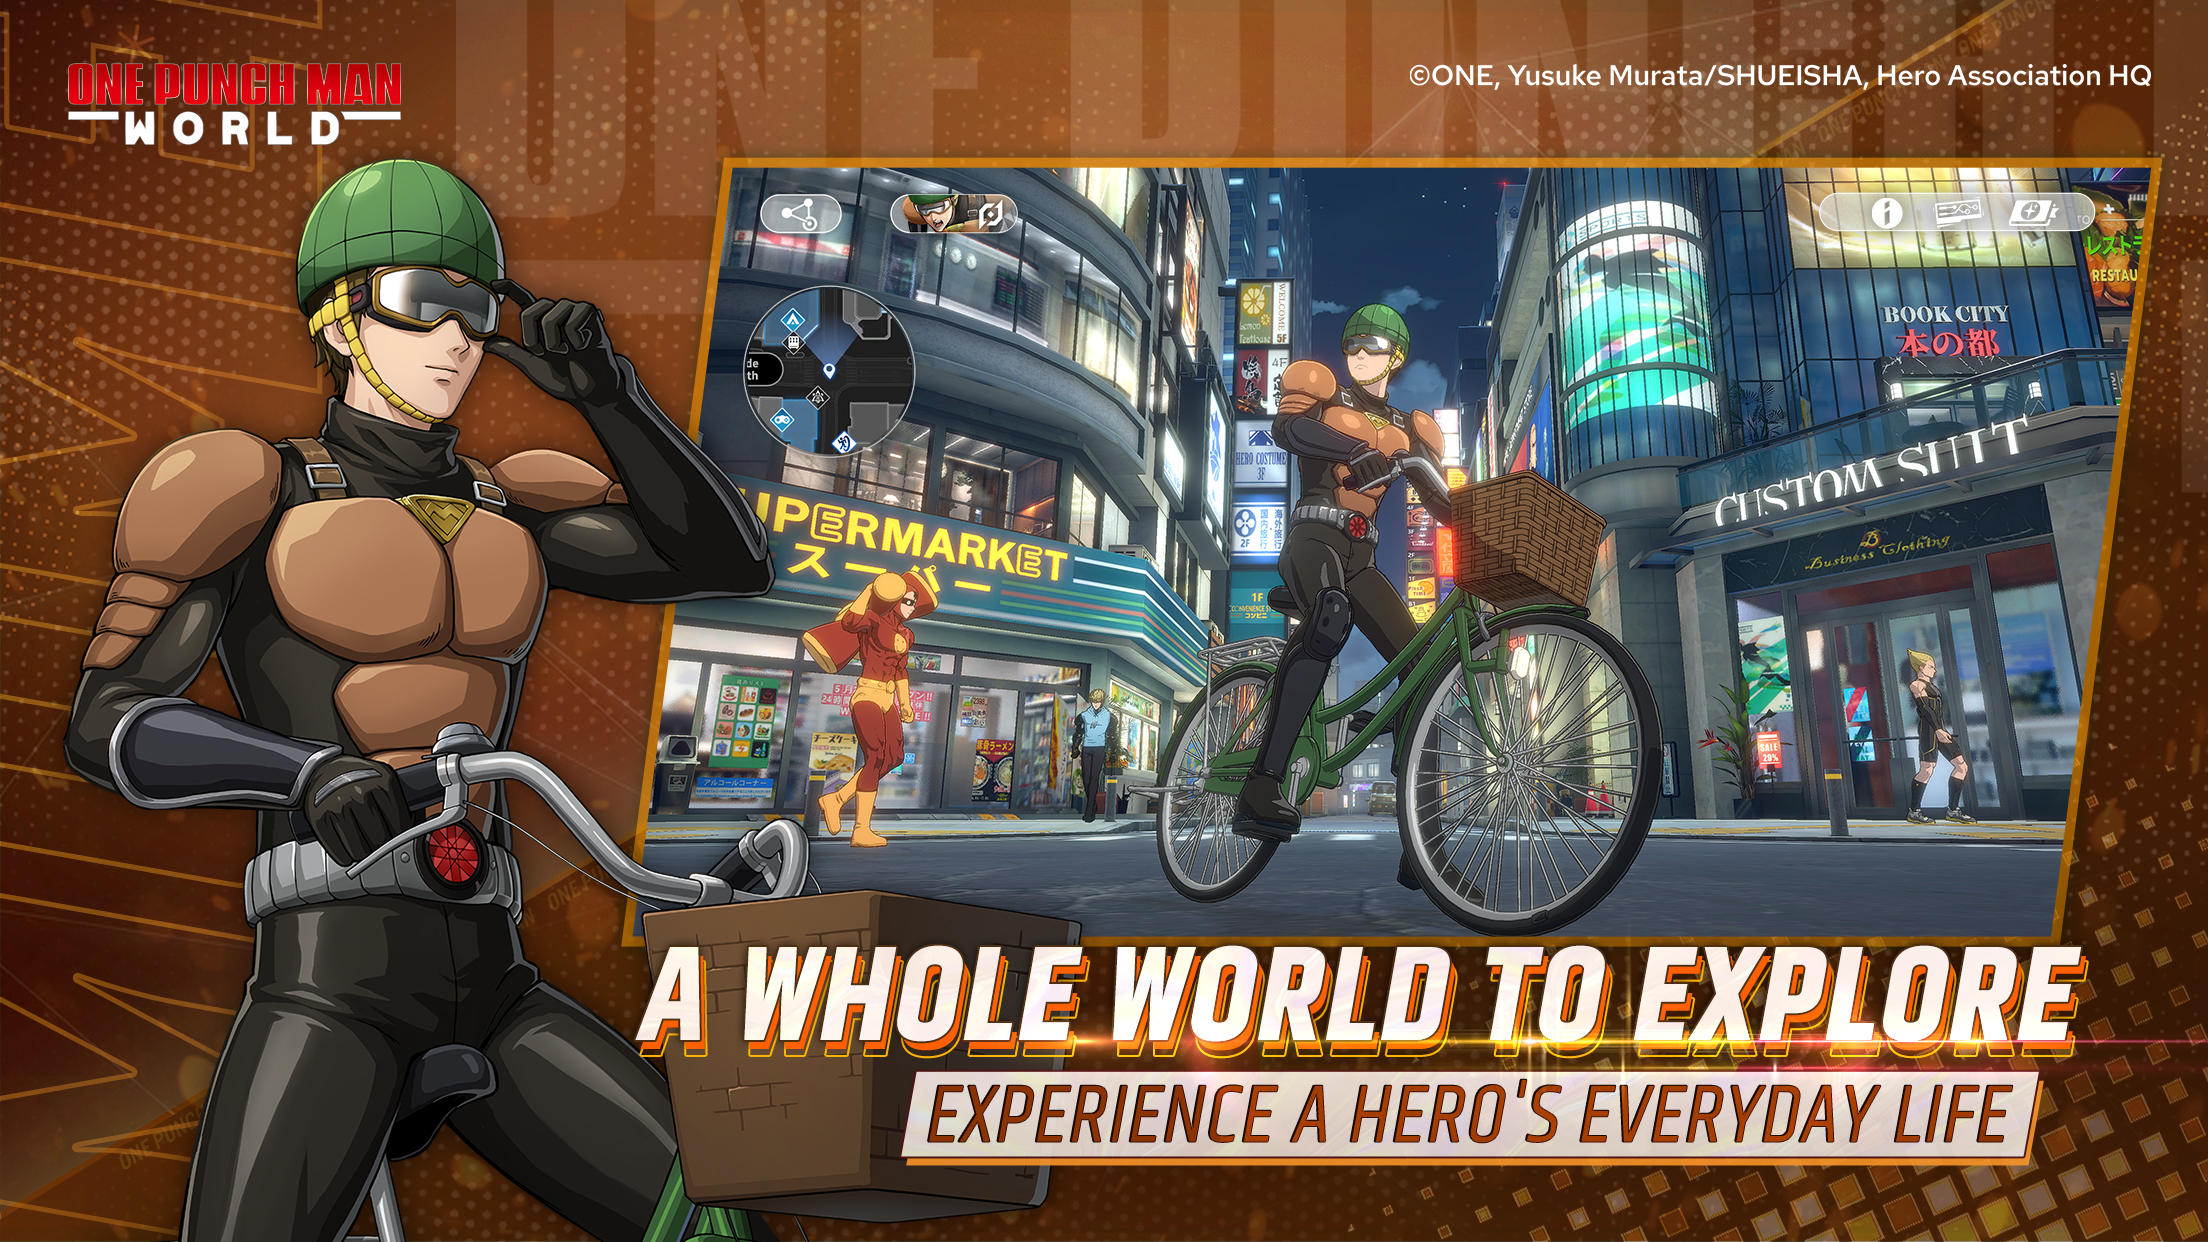 One Punch Man: World android iOS pre-register-TapTap